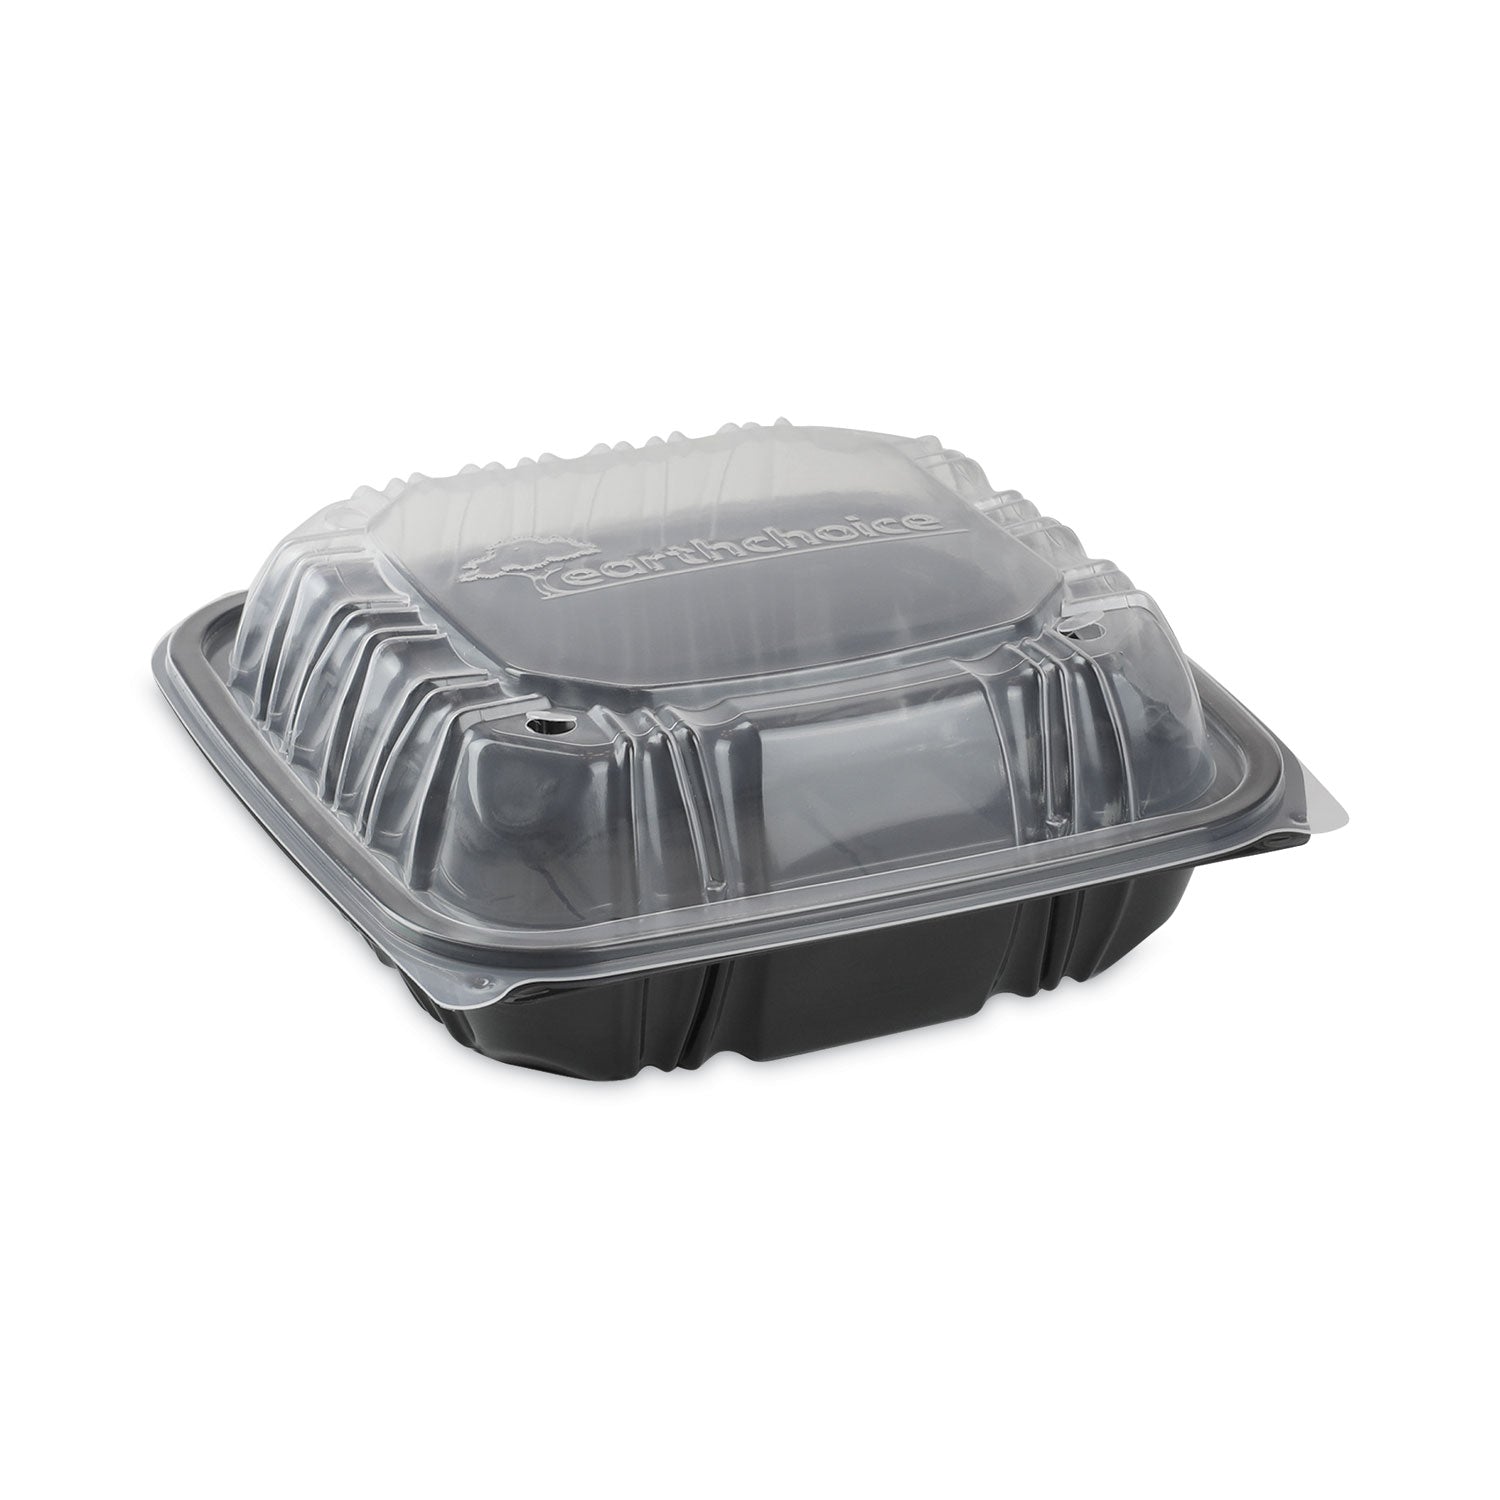 earthchoice-vented-dual-color-microwavable-hinged-lid-container-1-compartment-38oz-85x85x3-black-clear-plastic-150-ct_pctdc858100b000 - 1